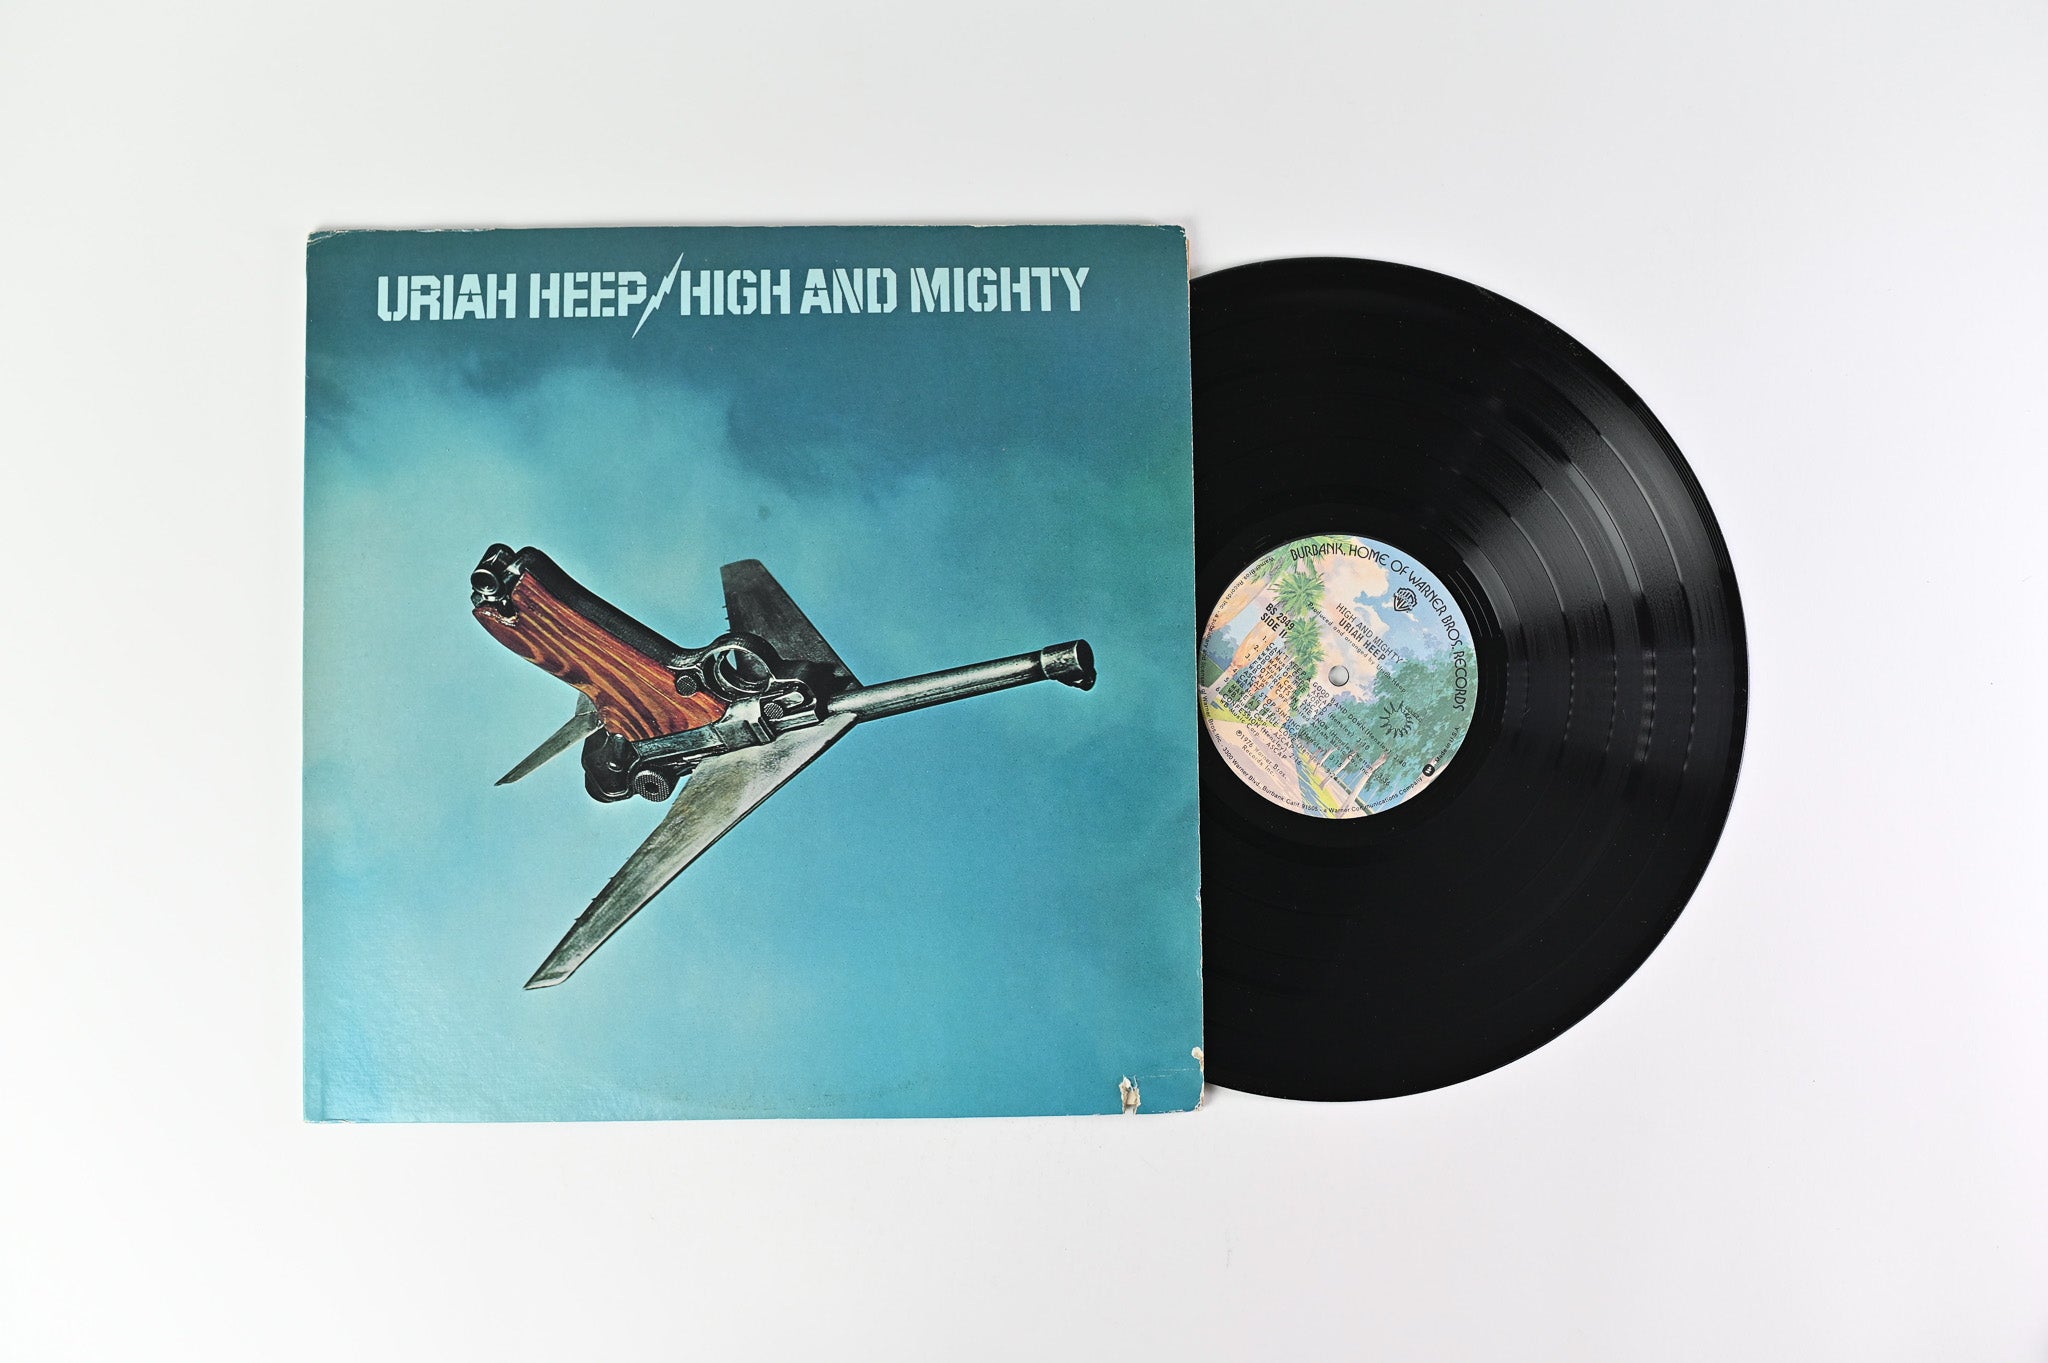 Uriah Heep - High And Mighty on Warner Bros. Records